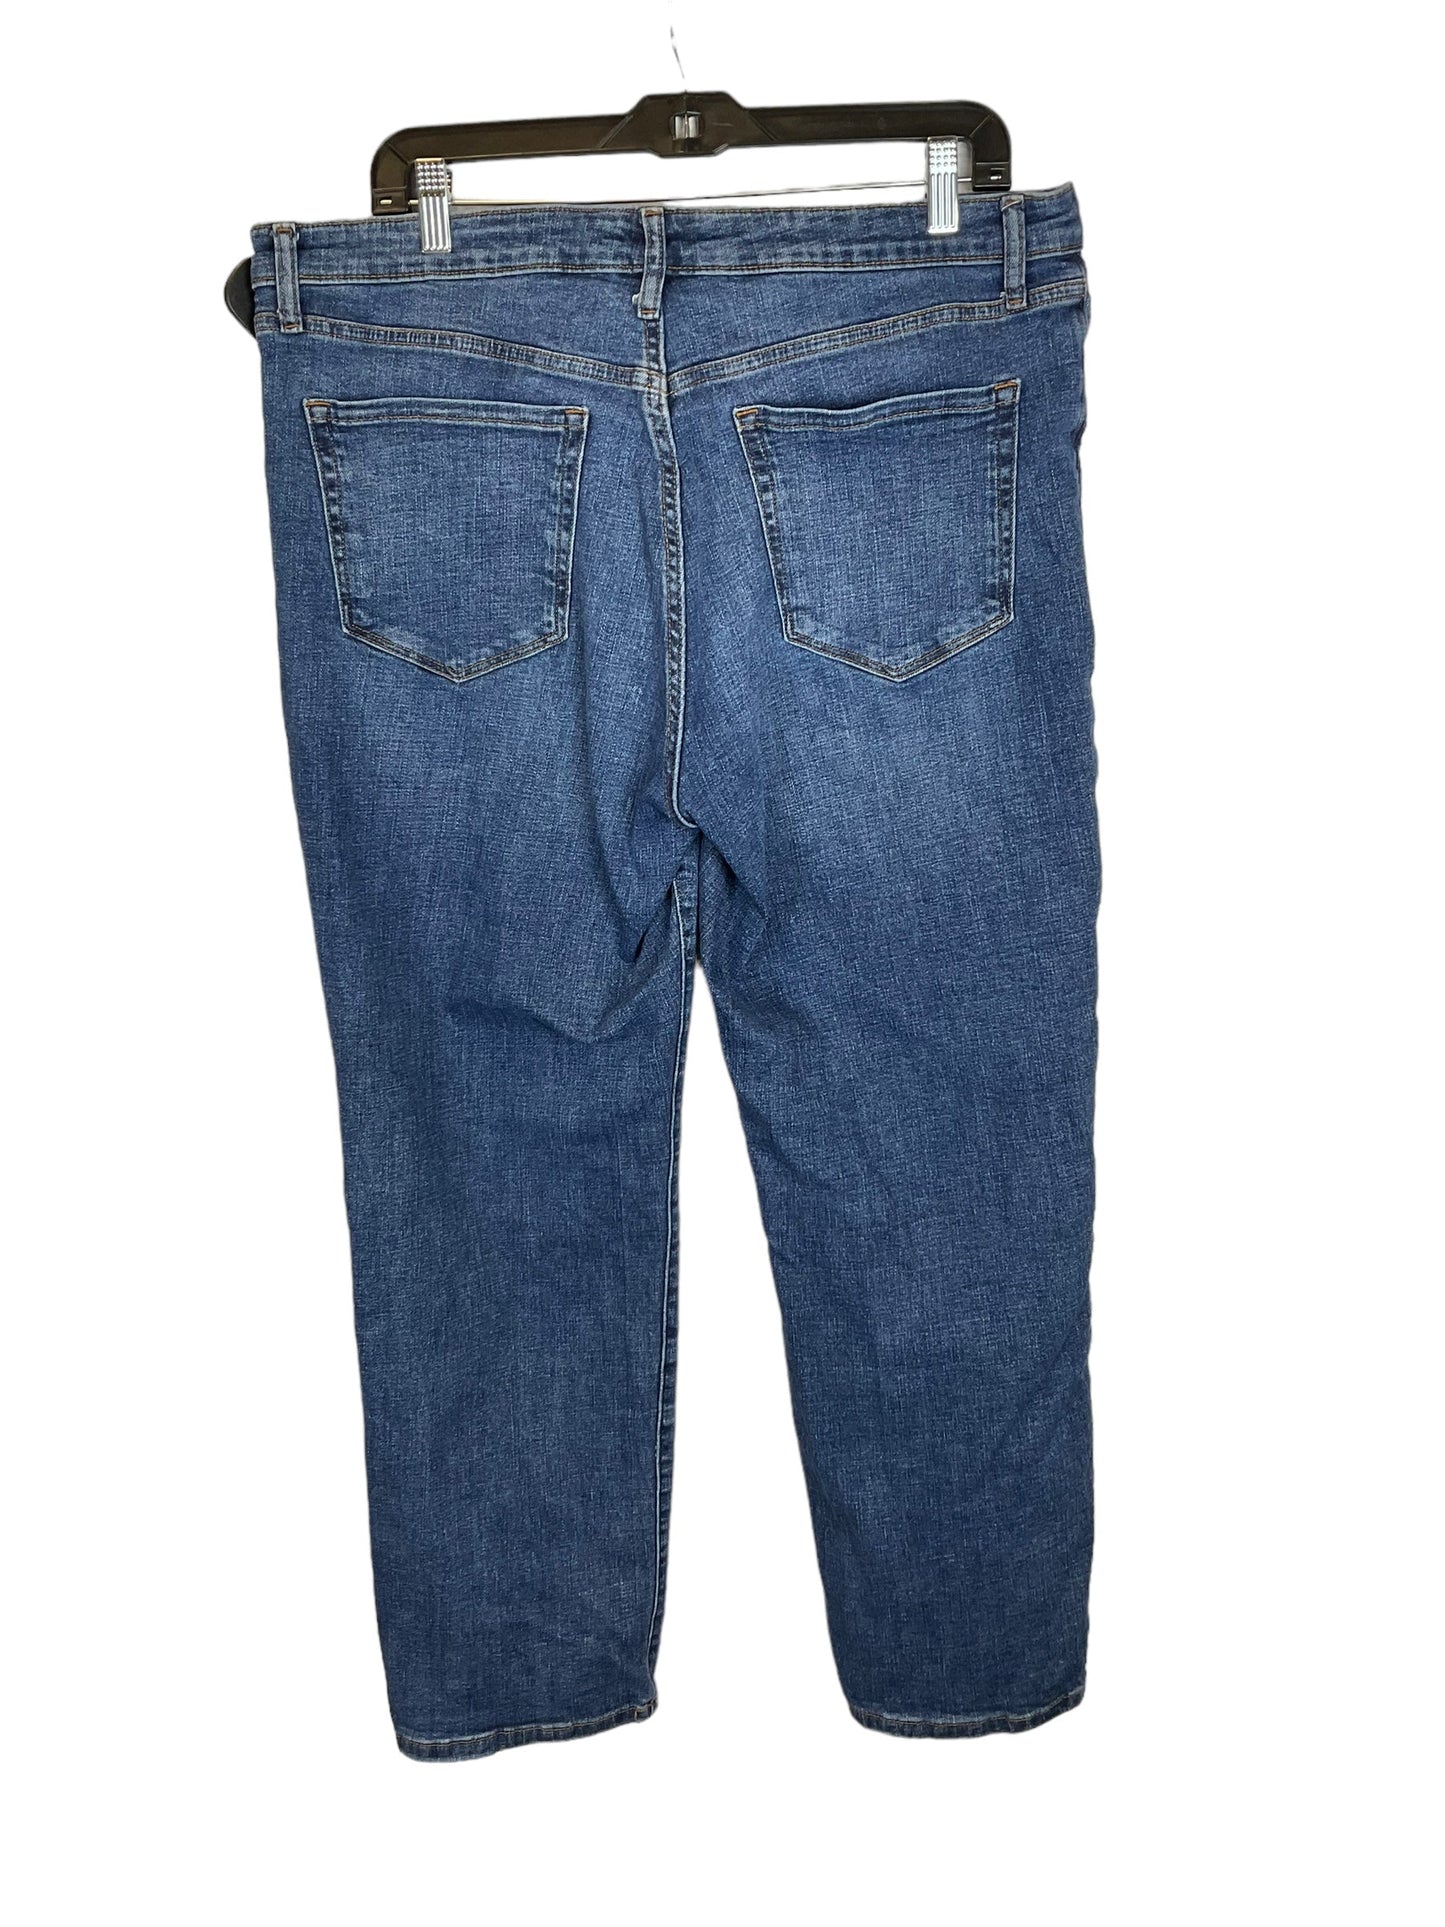 Jeans Relaxed/boyfriend By Chaps  Size: 14